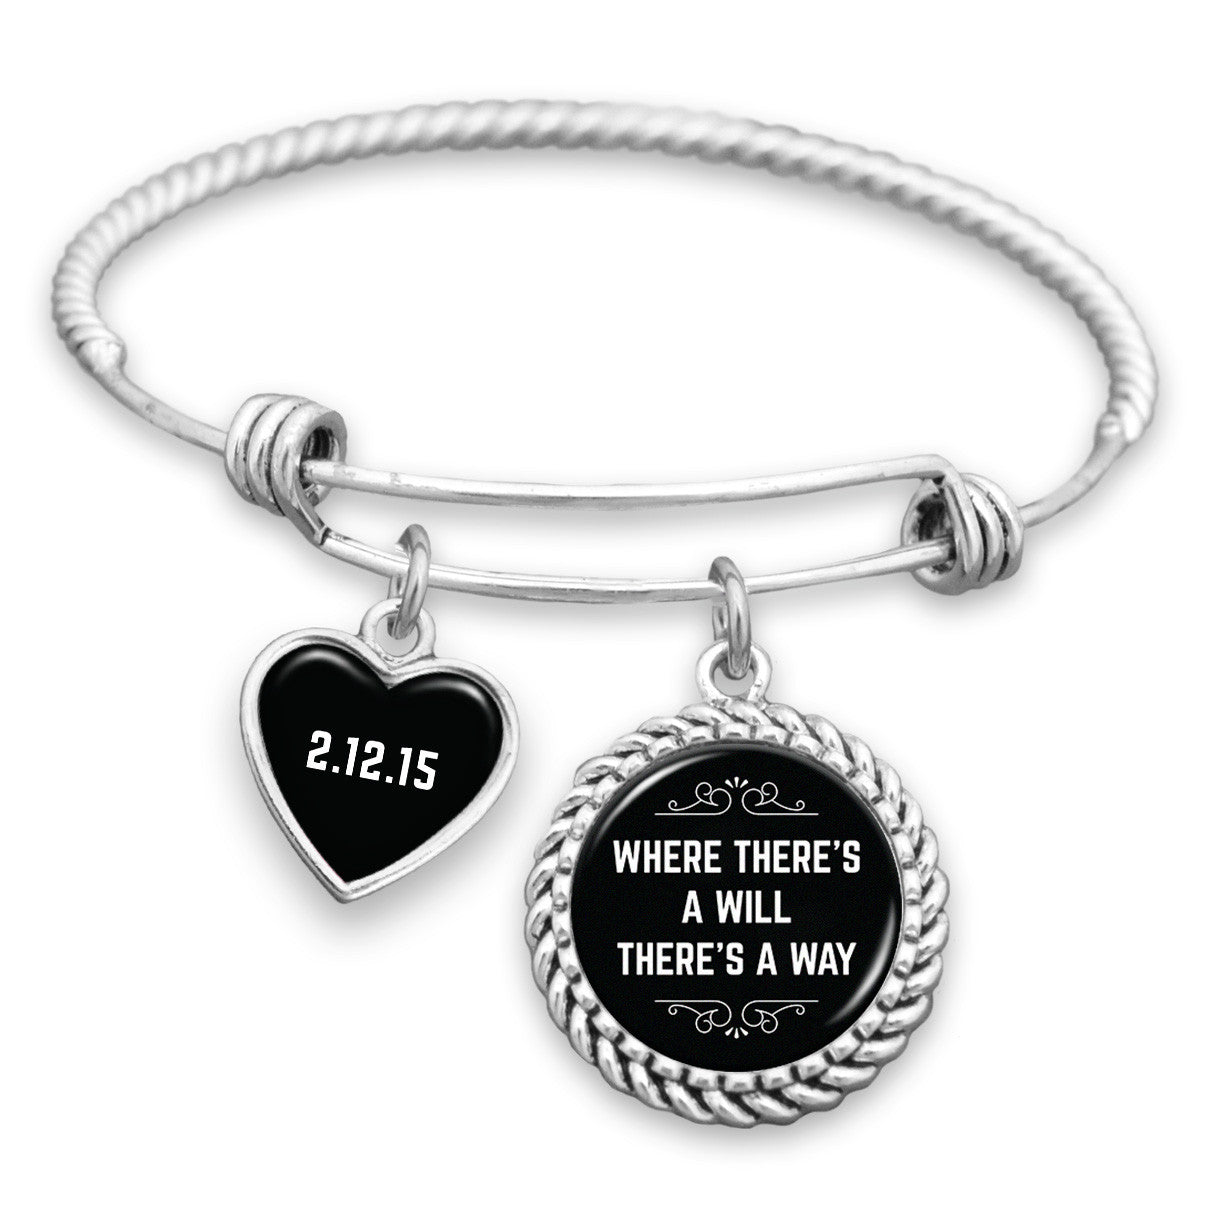 Where There's A Will There's A Way Personalized Sobriety Date Charm Bracelet